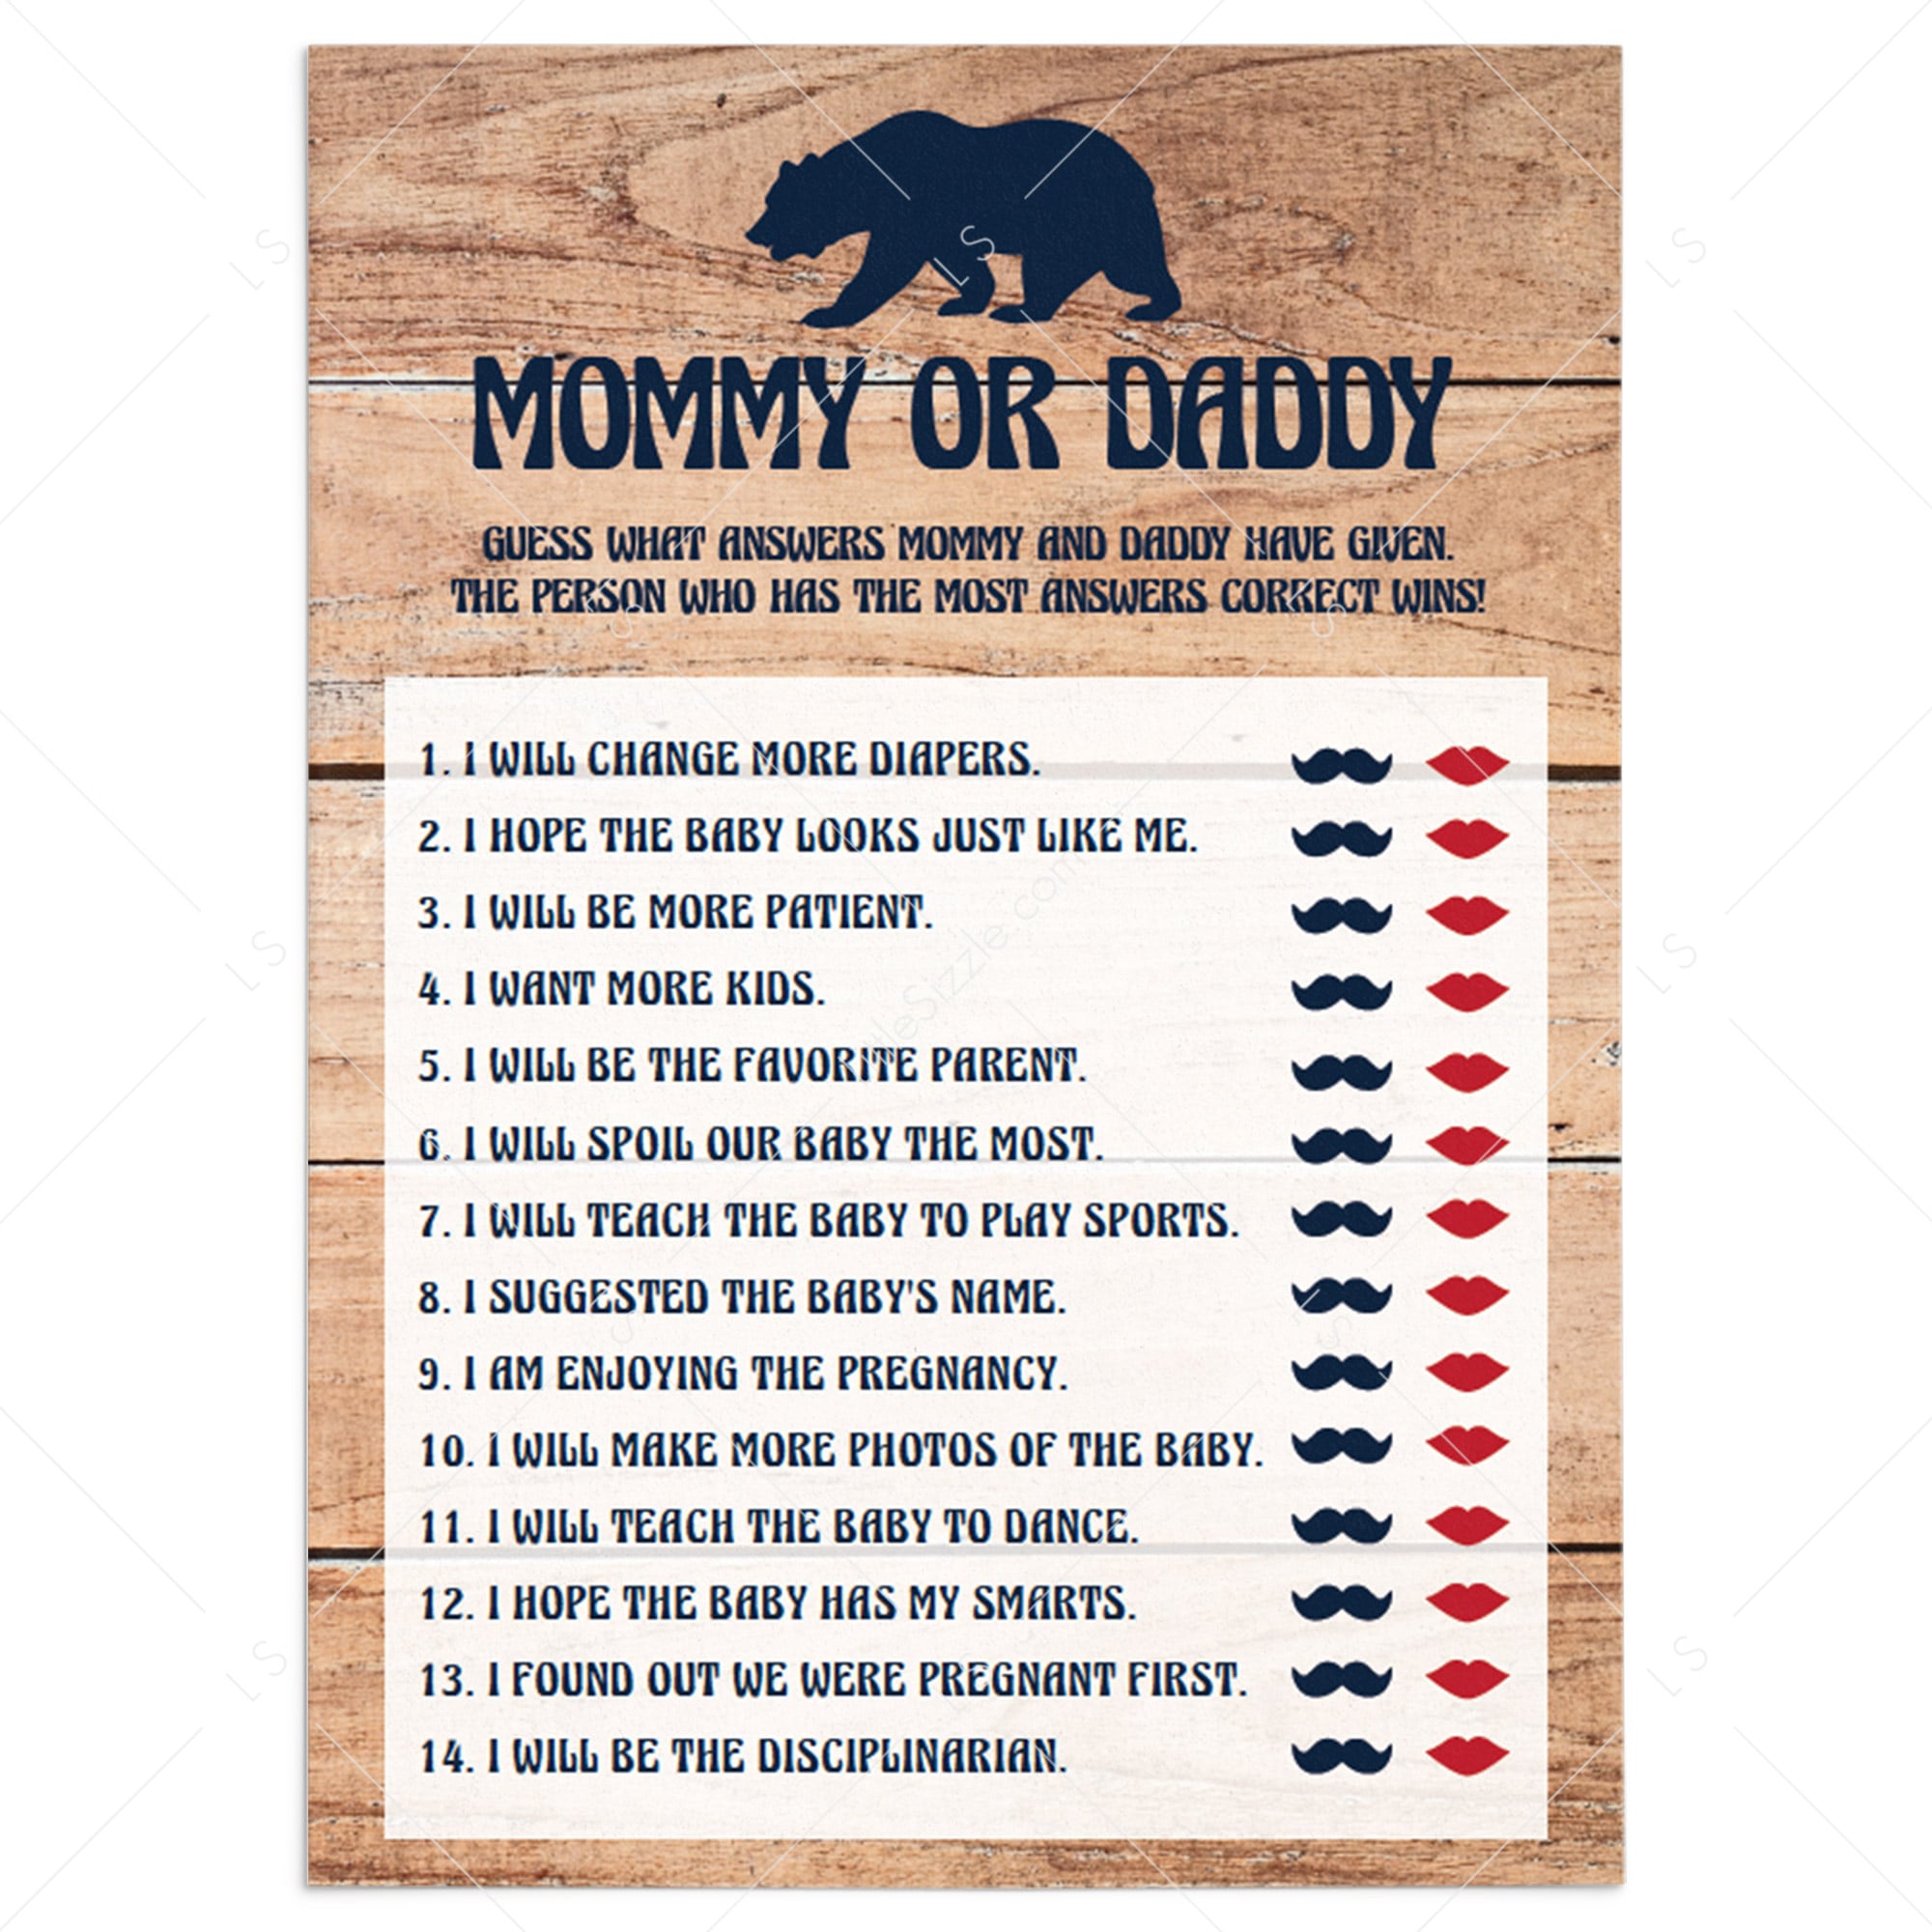 11 Woodland Baby Shower Games Printable Package - Press Print Party!